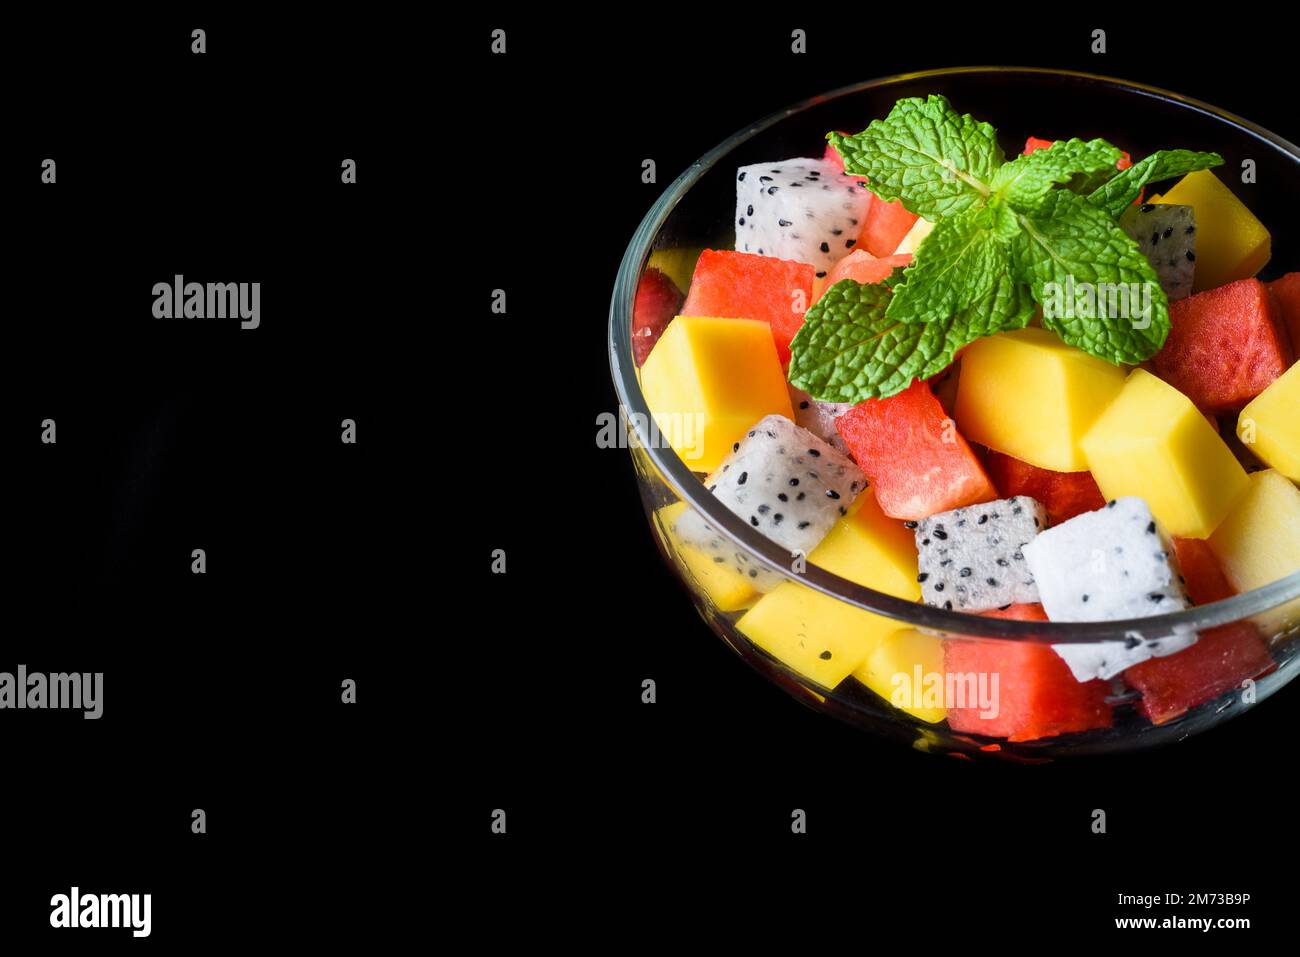 Fruit salad made of east asian fruits isolated on black background side view Stock Photo